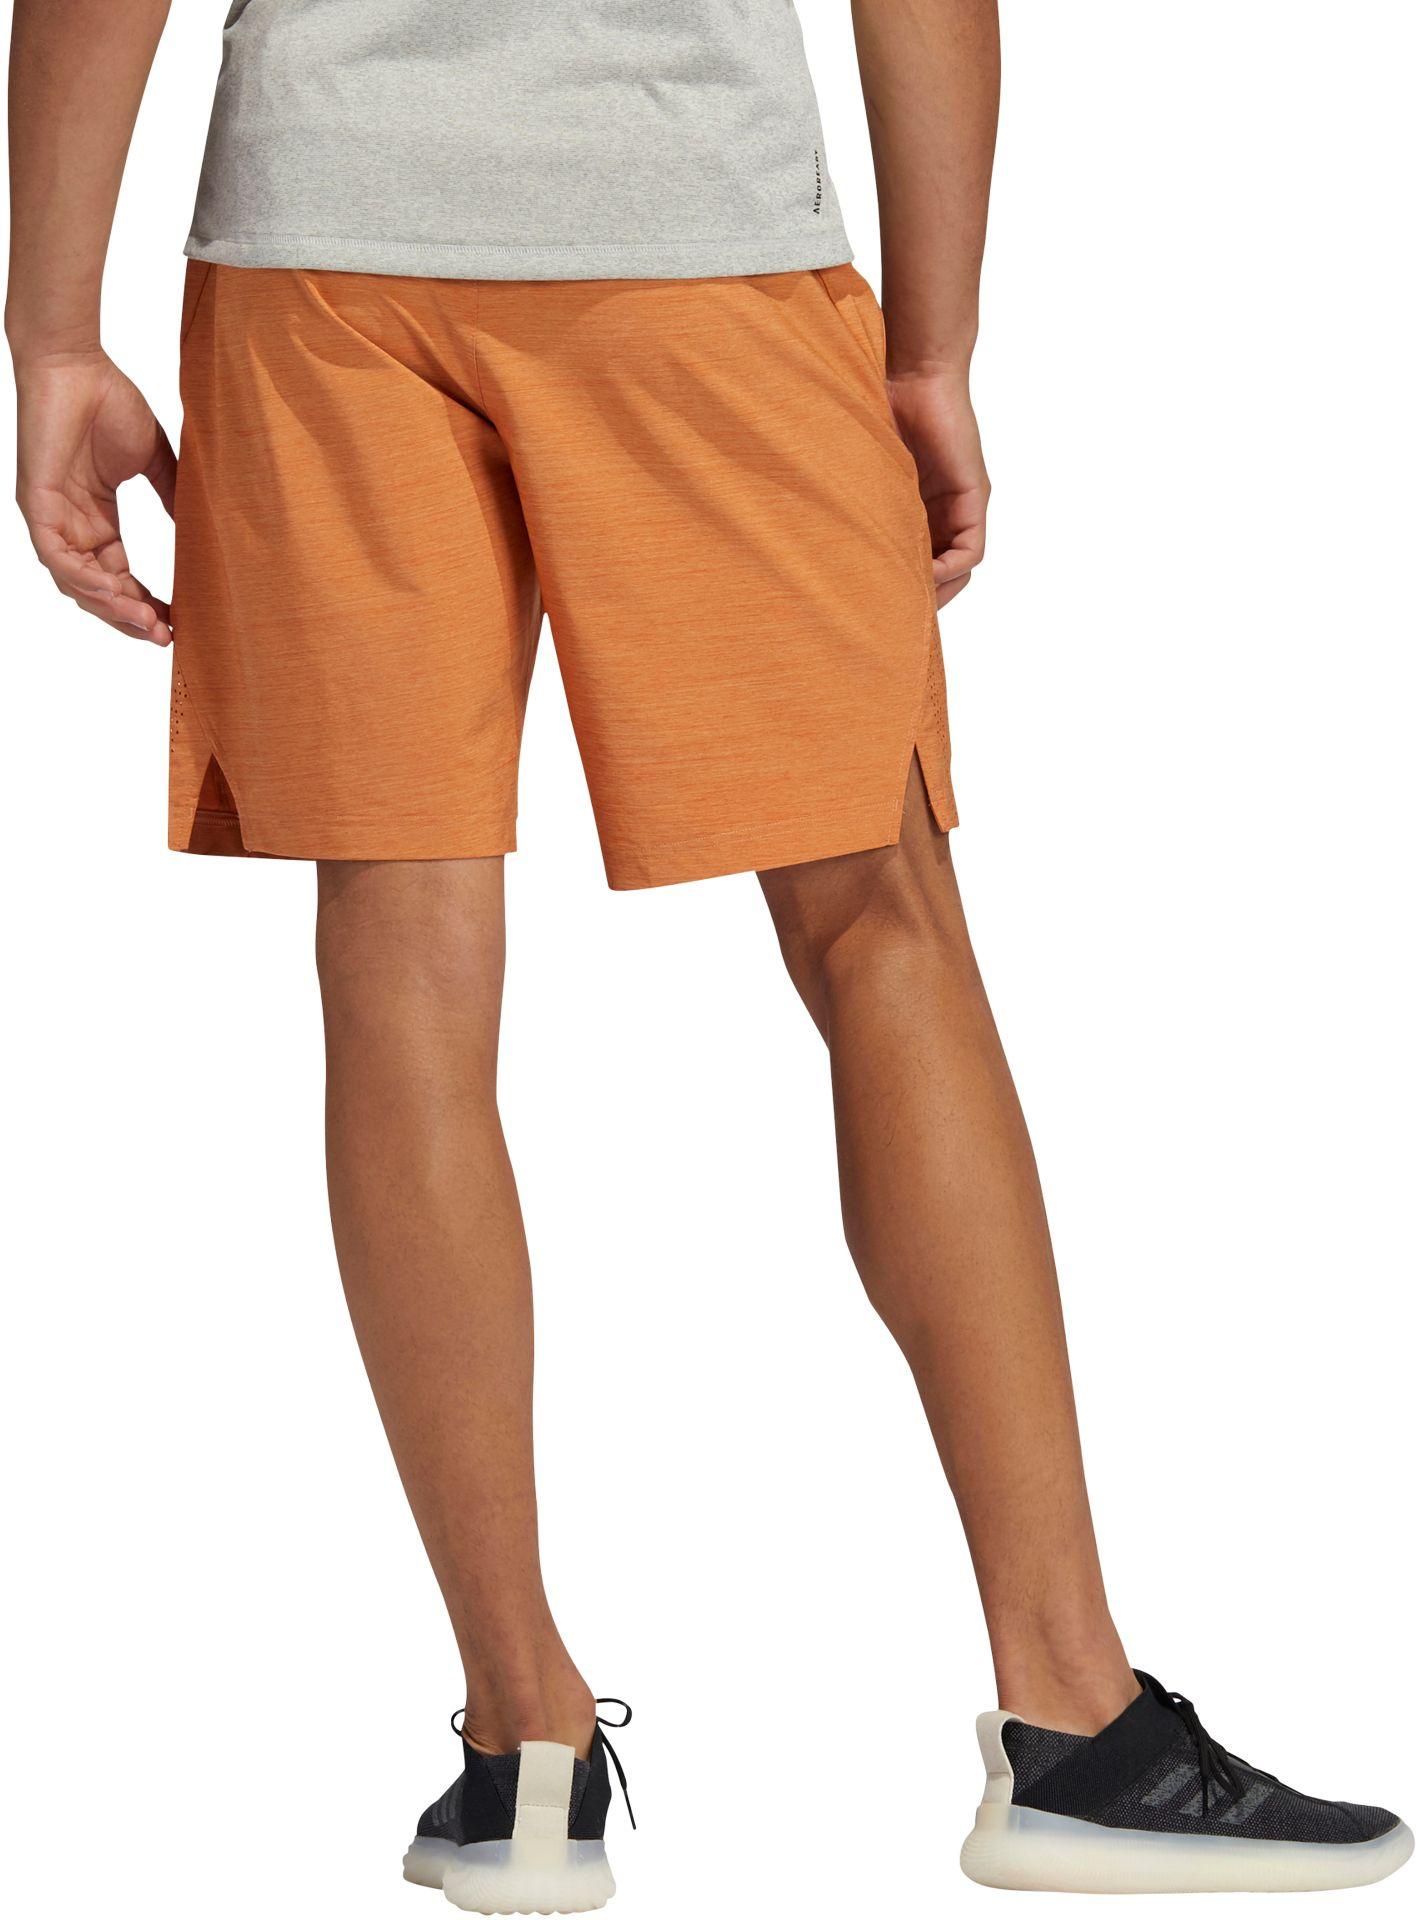 adidas Axis 20 Woven Heathered Shorts for Men - Lyst